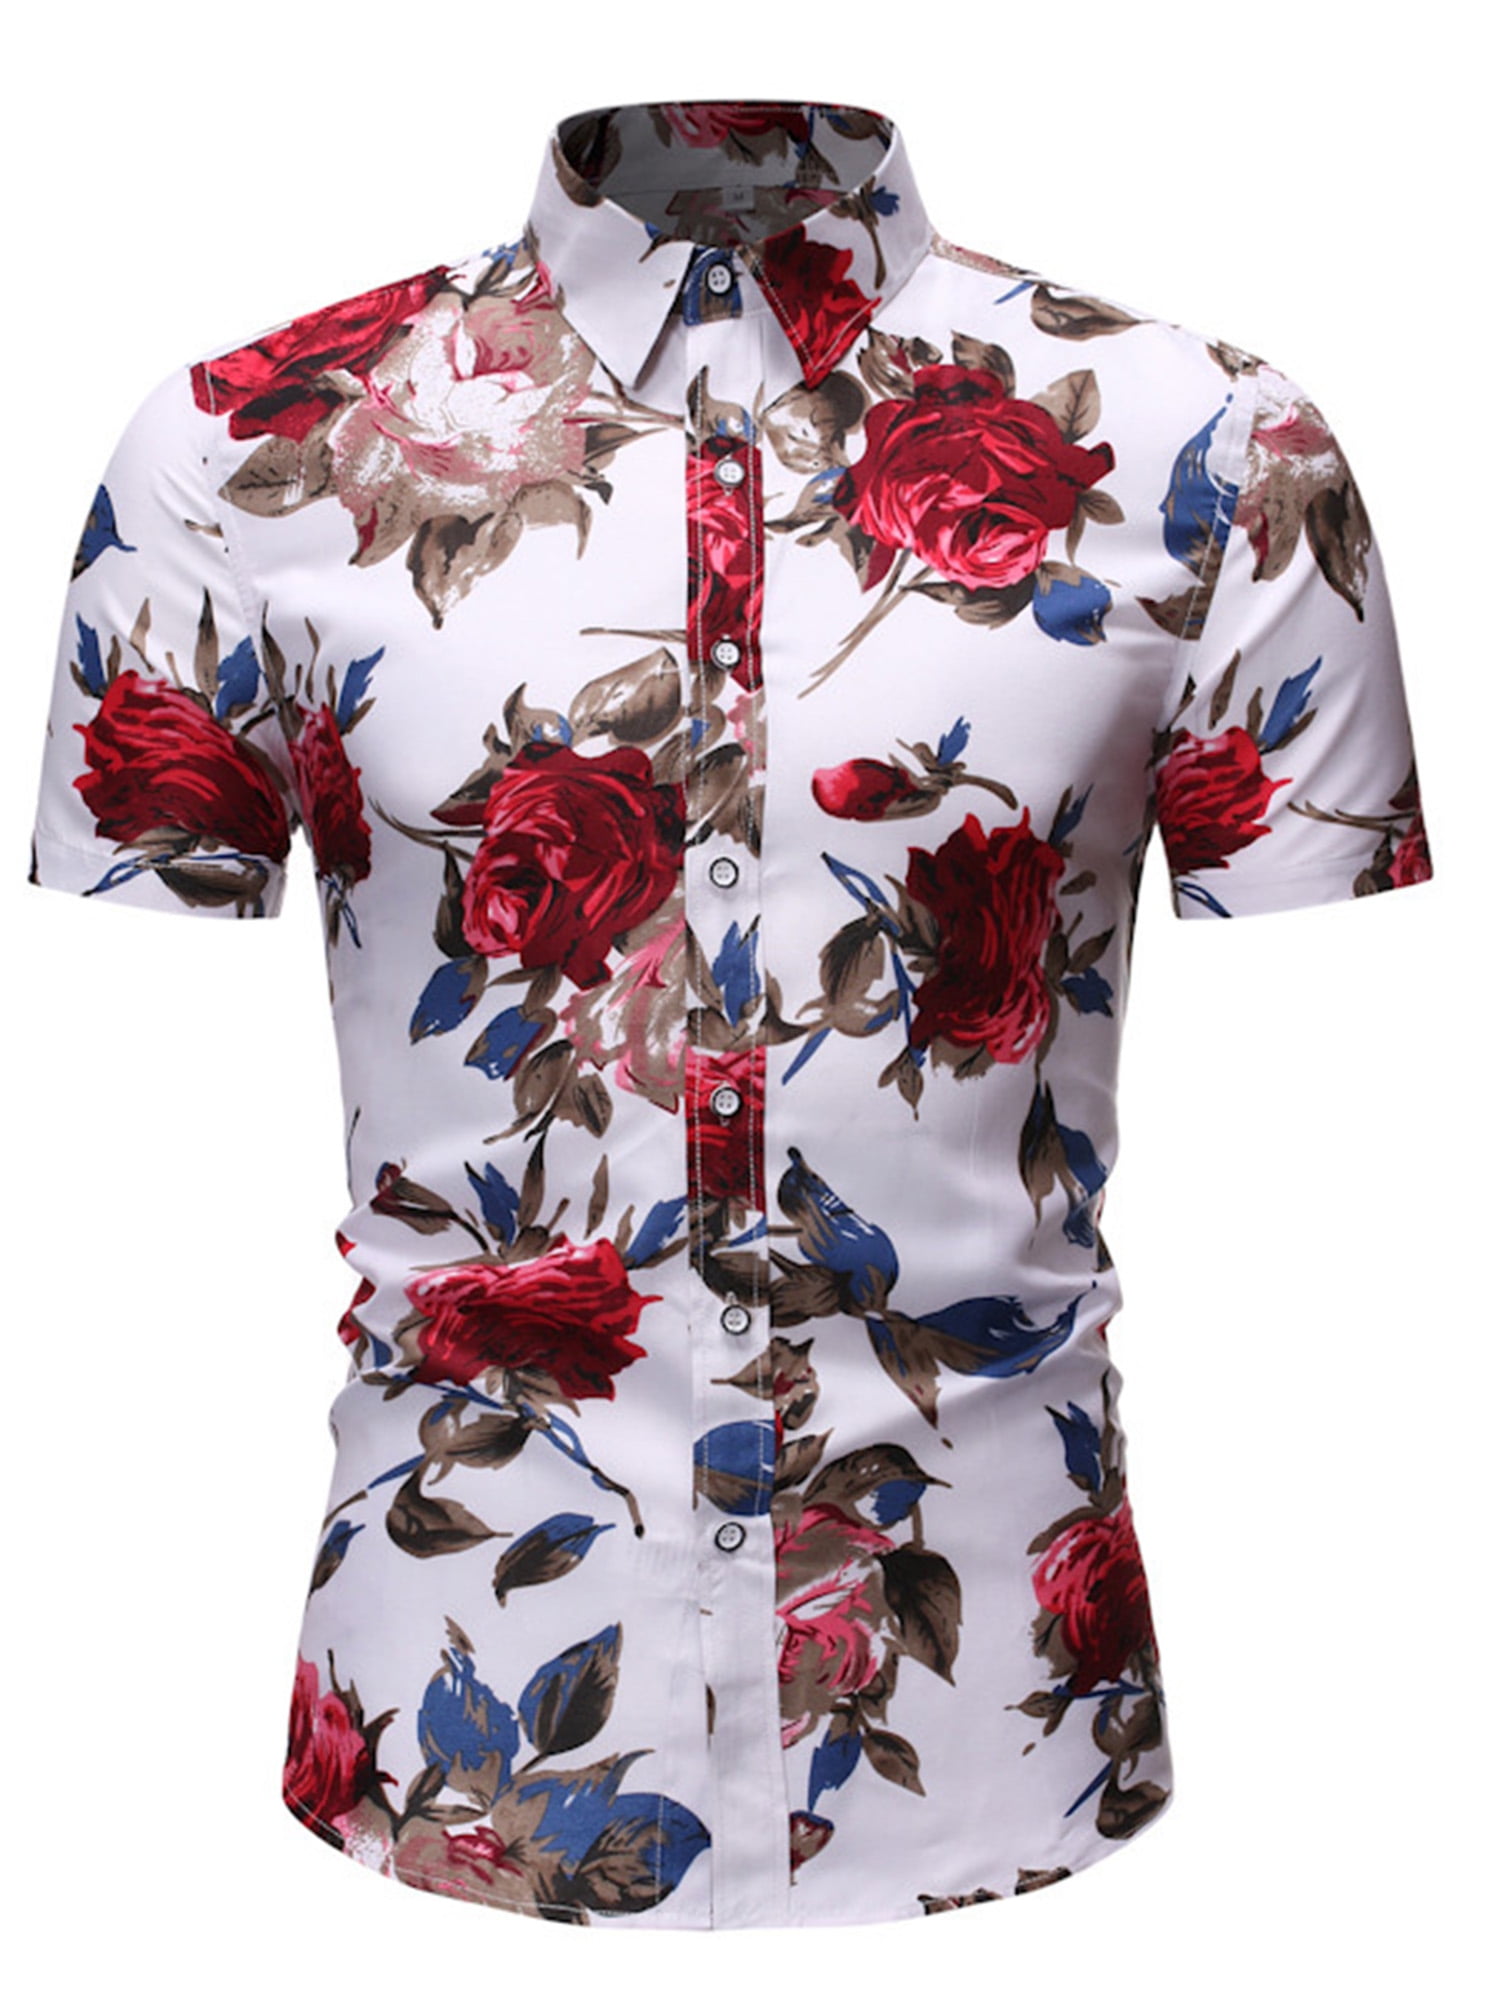 Outique Summer Hipster Mens Floral Print Slim Fit Long Sleeve Casual Button Down Shirt Patchwork Plaid Beach Dress Tops 